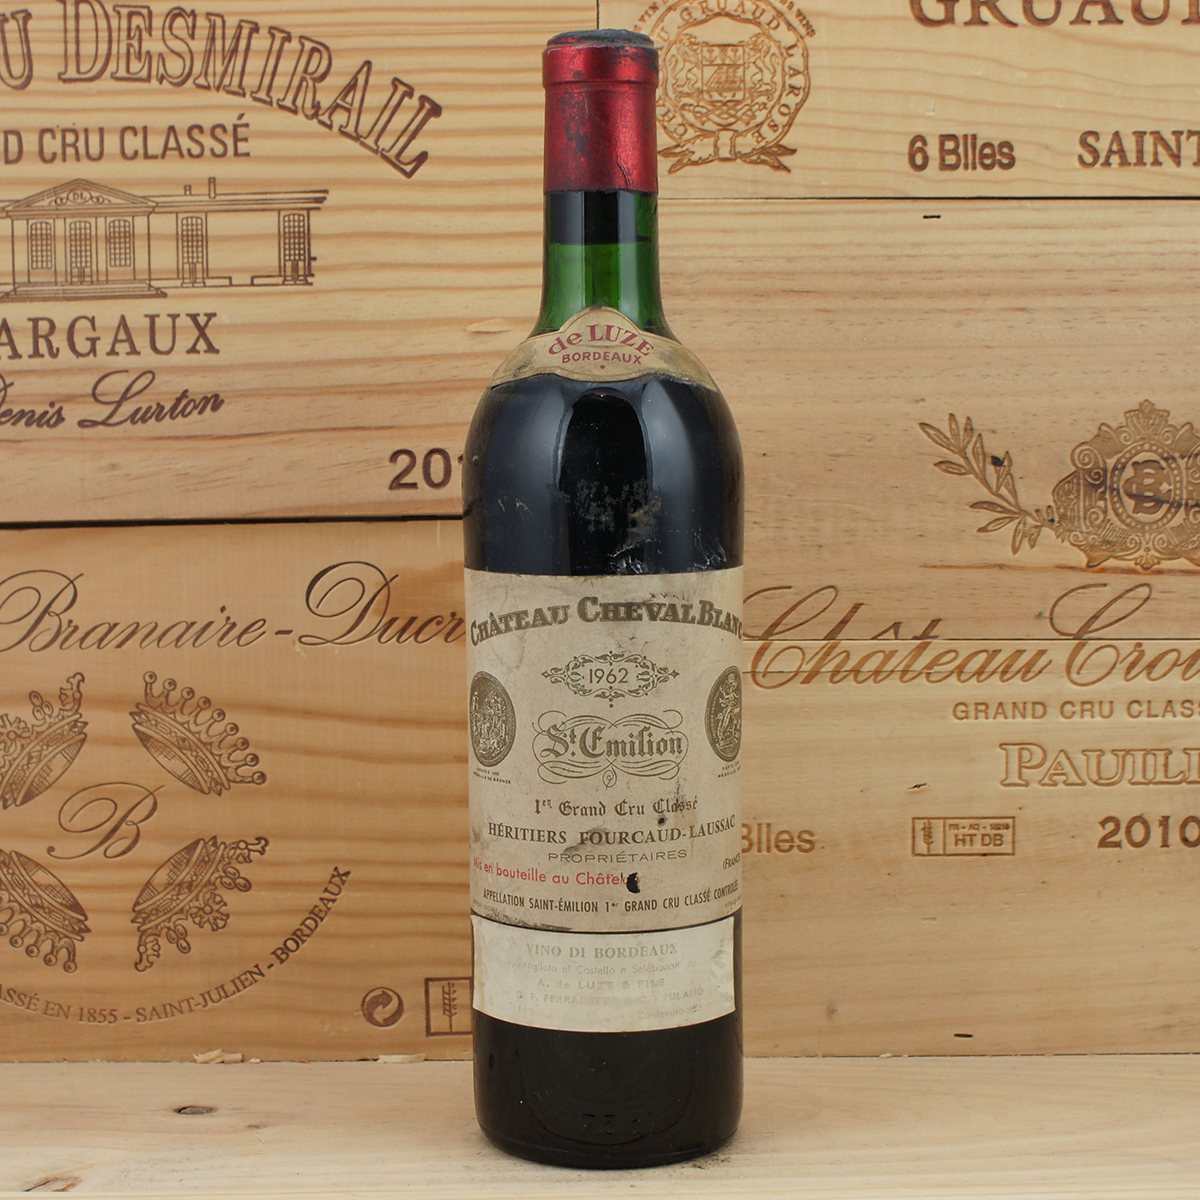 Château Cheval blanc 1987 - great wine Bottles in Paradise